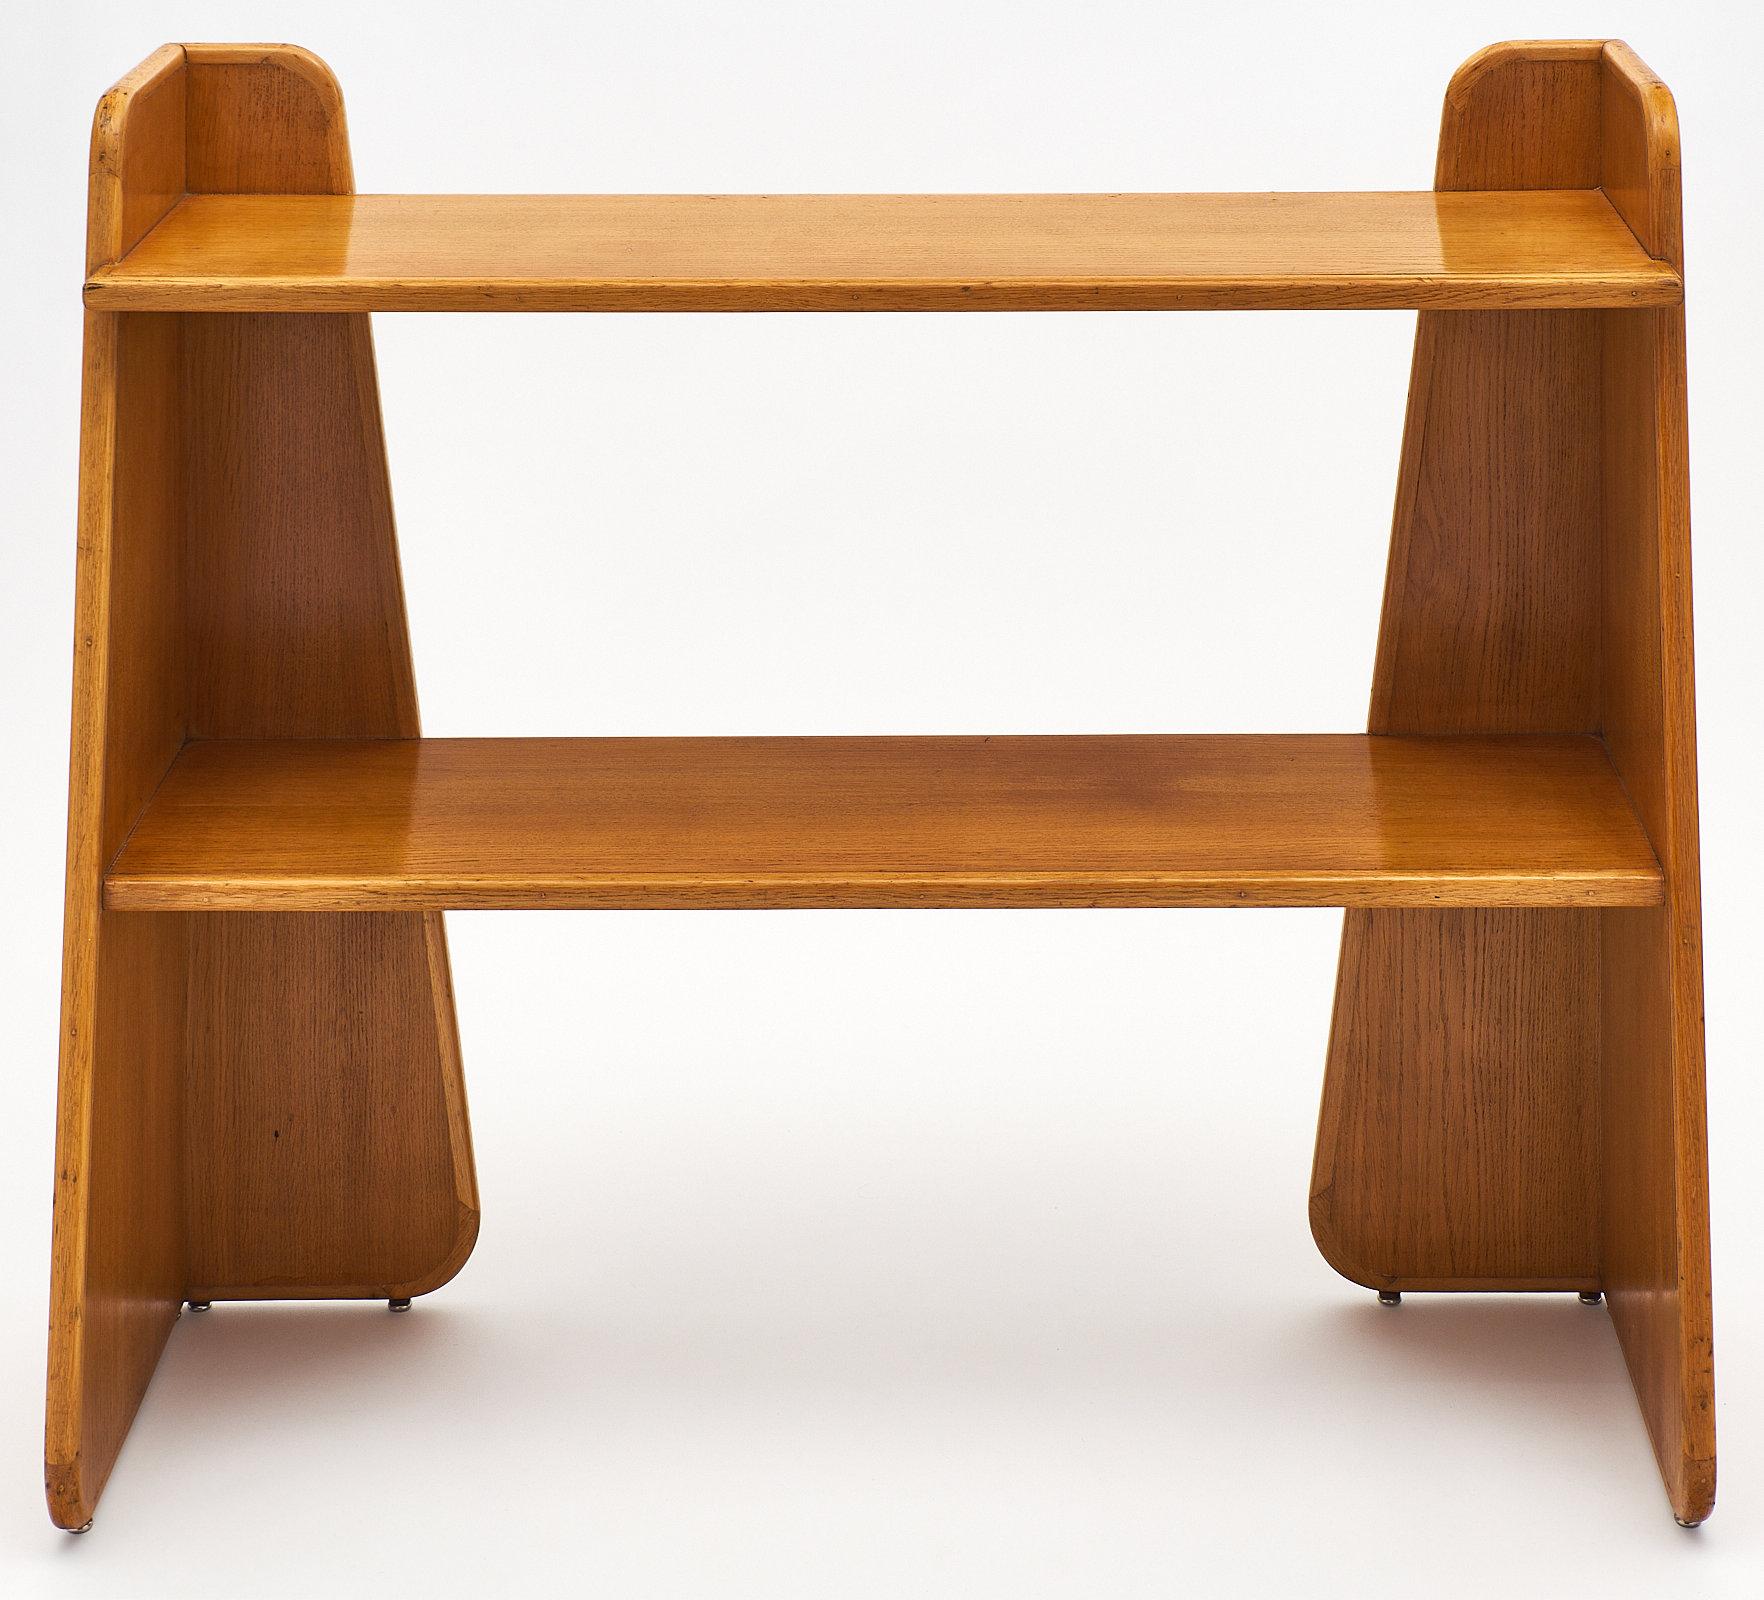 French modernist console in the manner of Pierre Chareau with side skirts and two solid oak shelves.